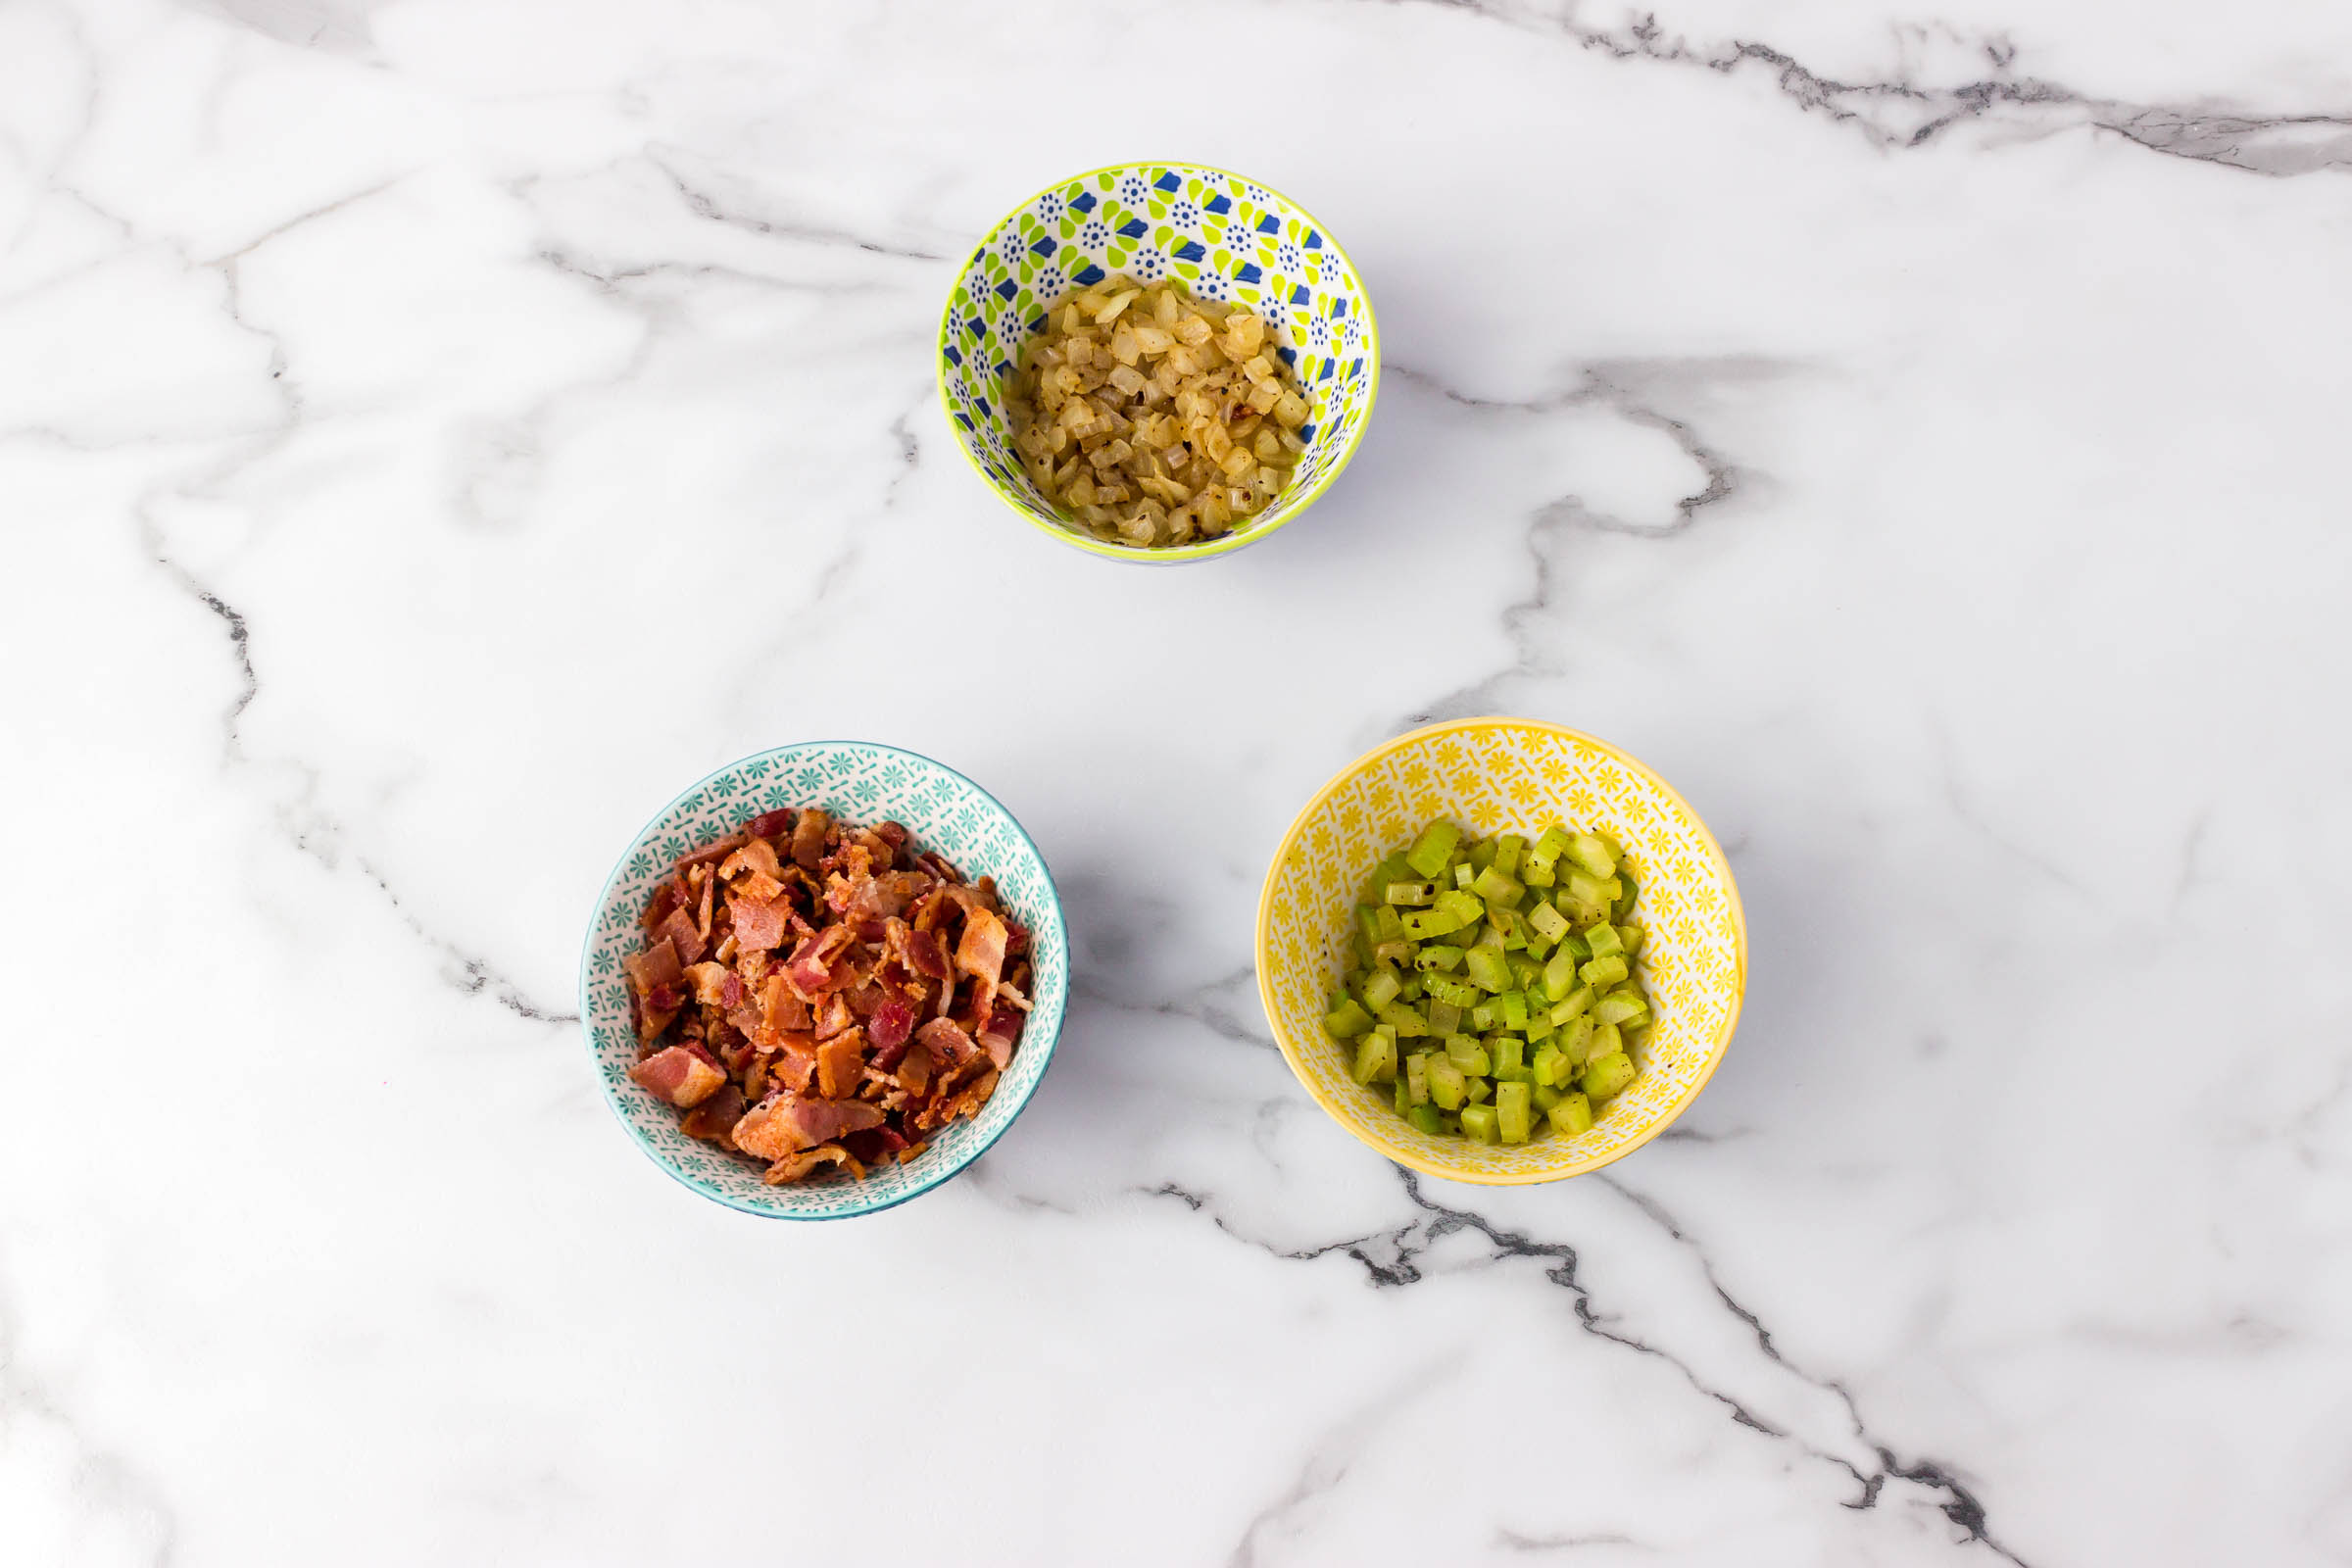 tender veggies and bacon in bowls